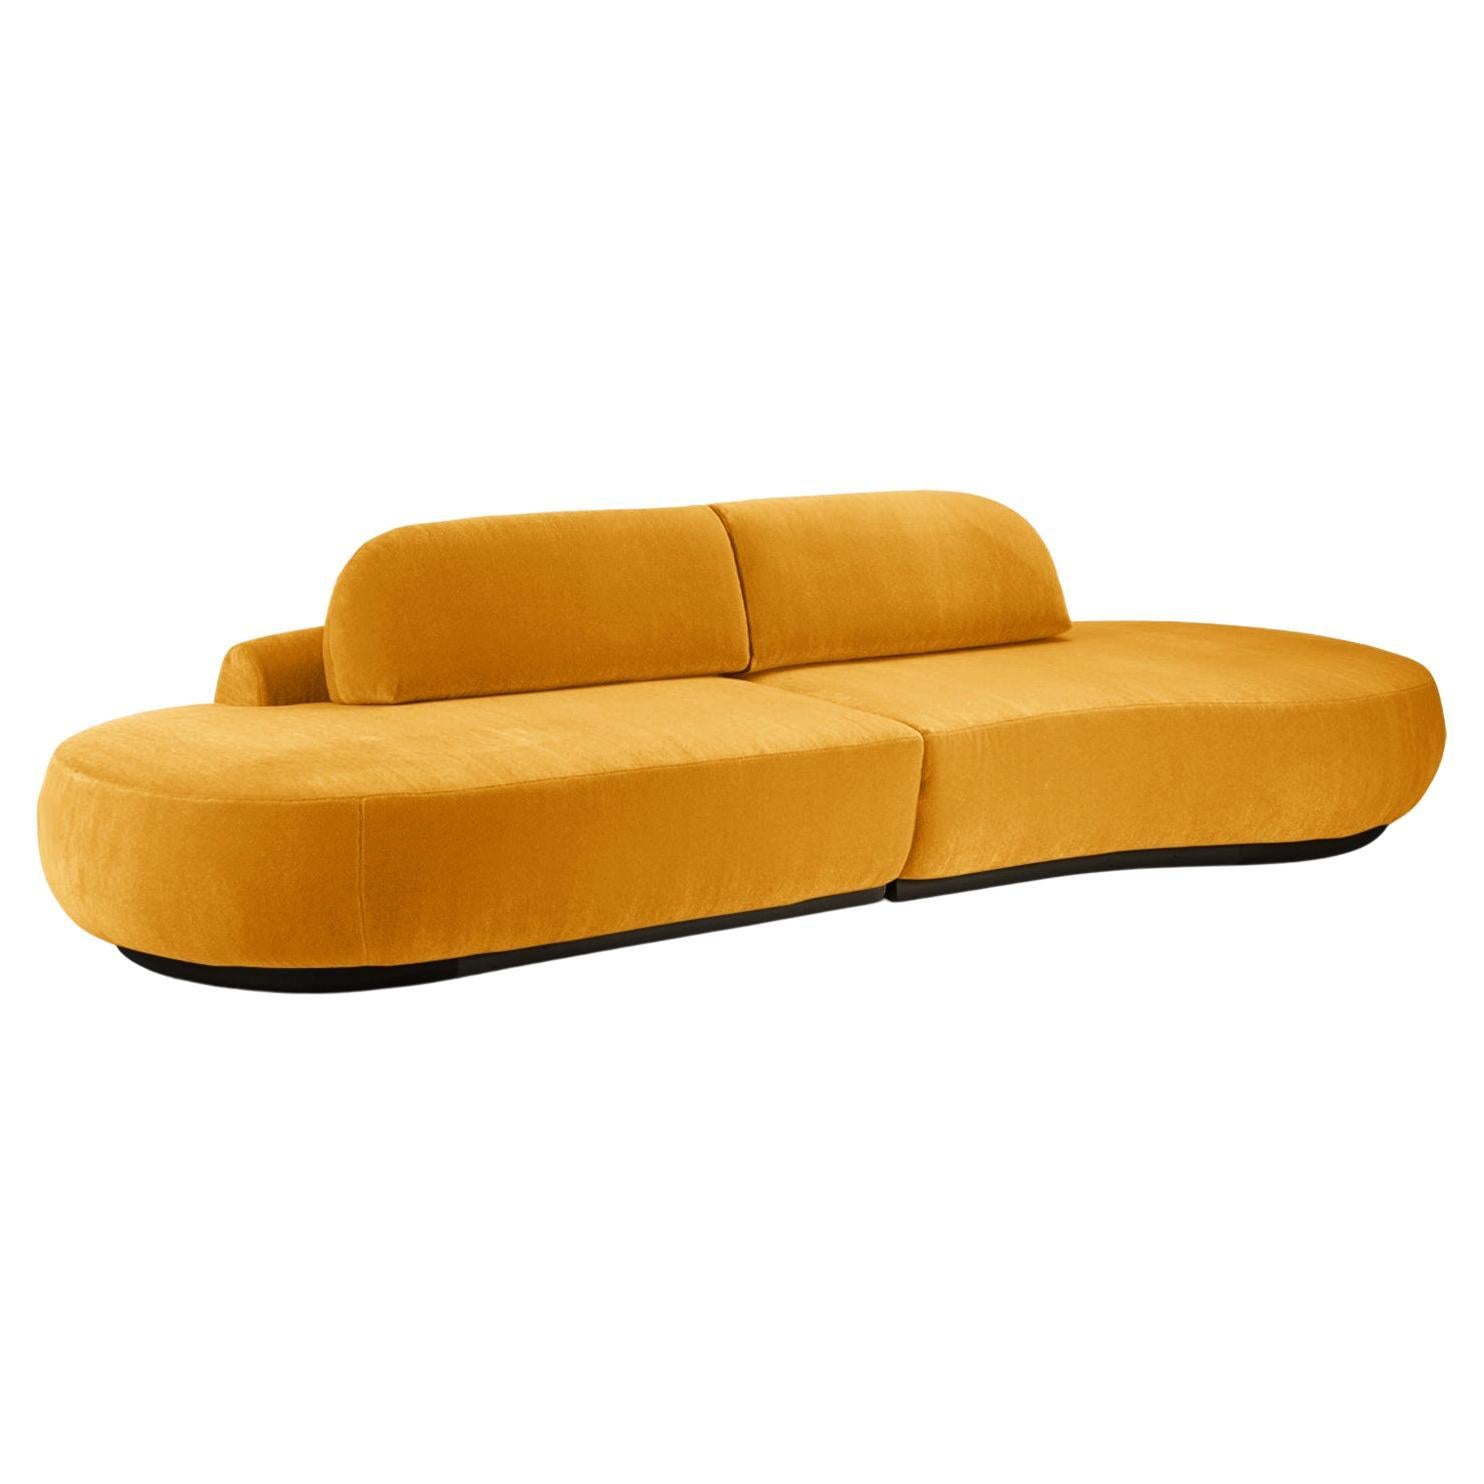 Naked Curved Sectional Sofa, 2 Piece with Beech Ash-056-5 and Corn